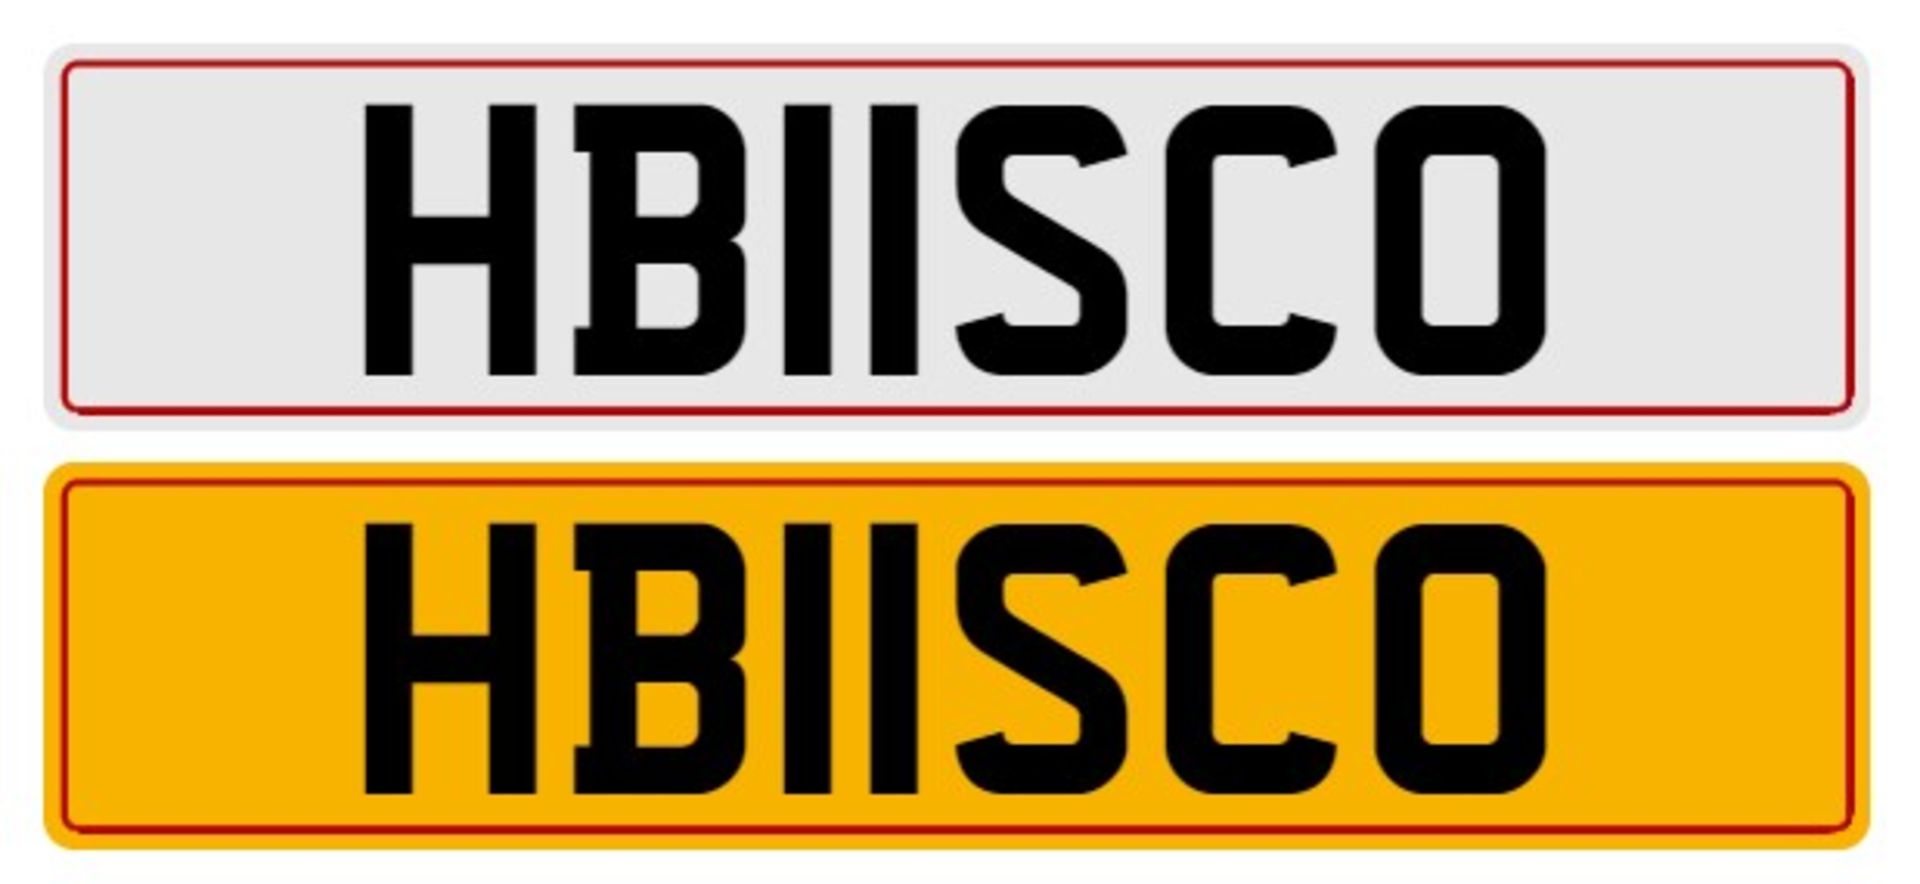 Cherished registration number.: .HB11SCO An administration fee of £80 + VAT will be added to the